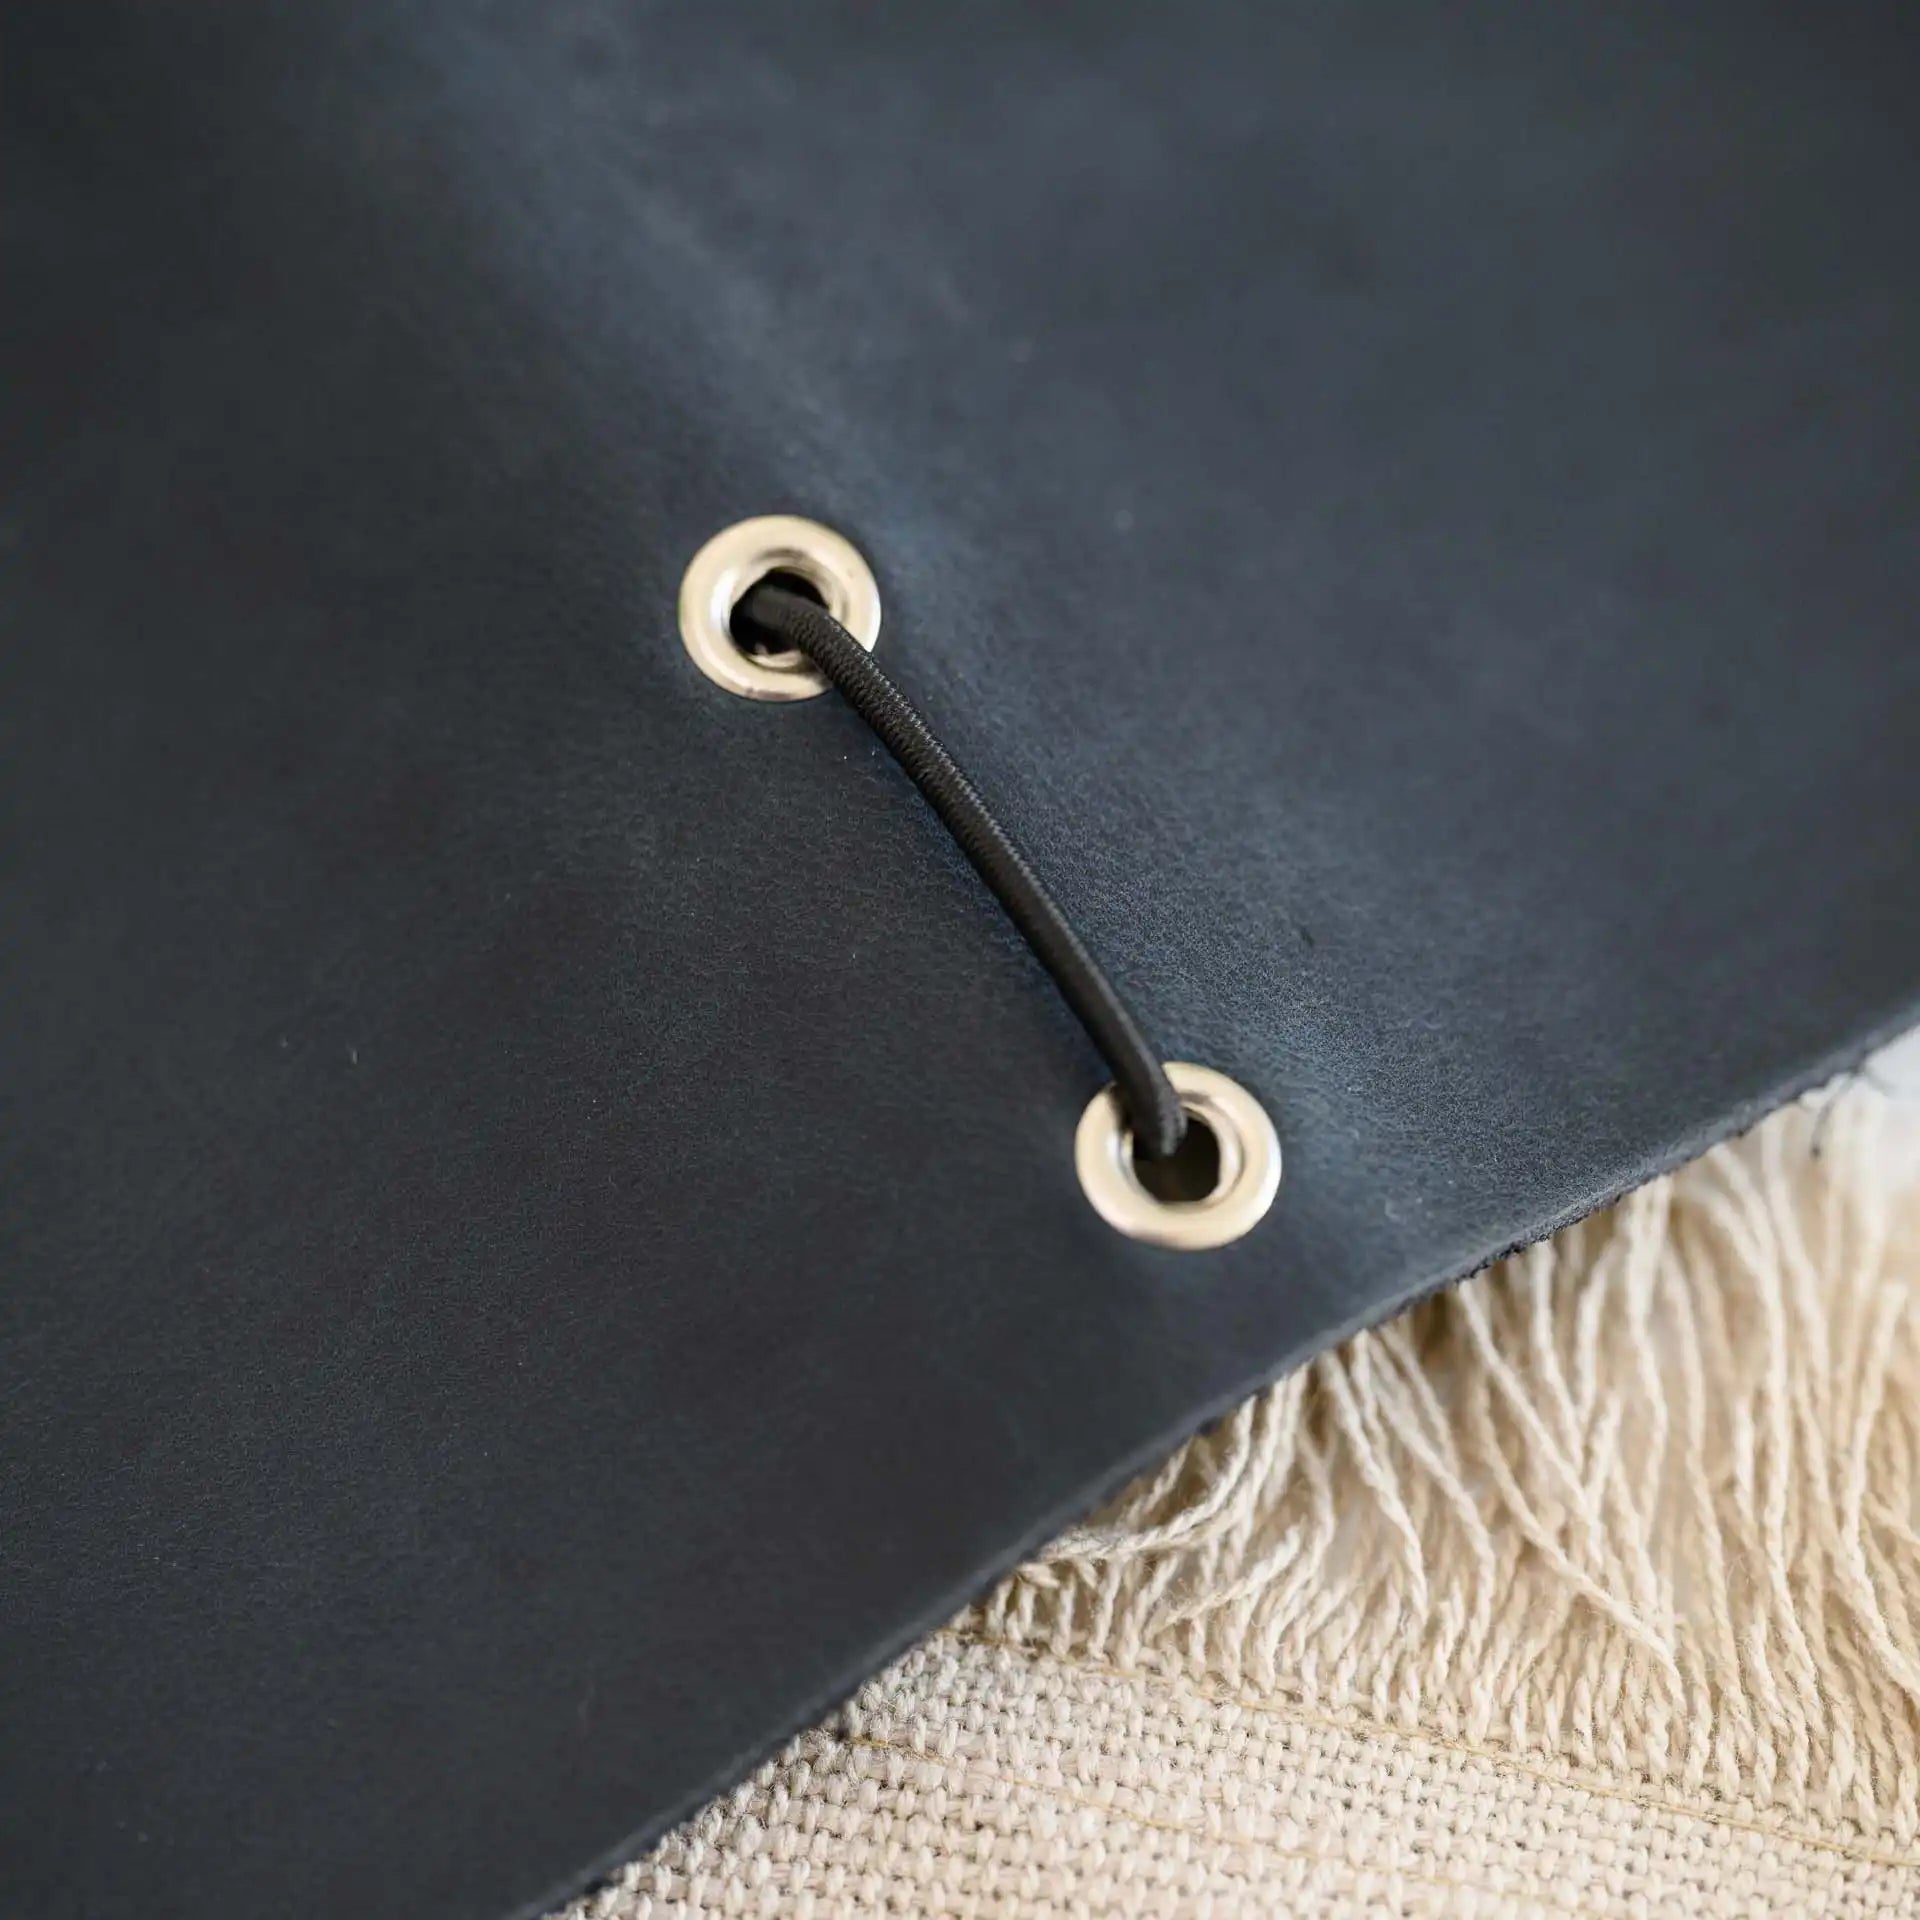 Present your menu with class using our elegant leather cover, ideal for upscale restaurants and cafes.